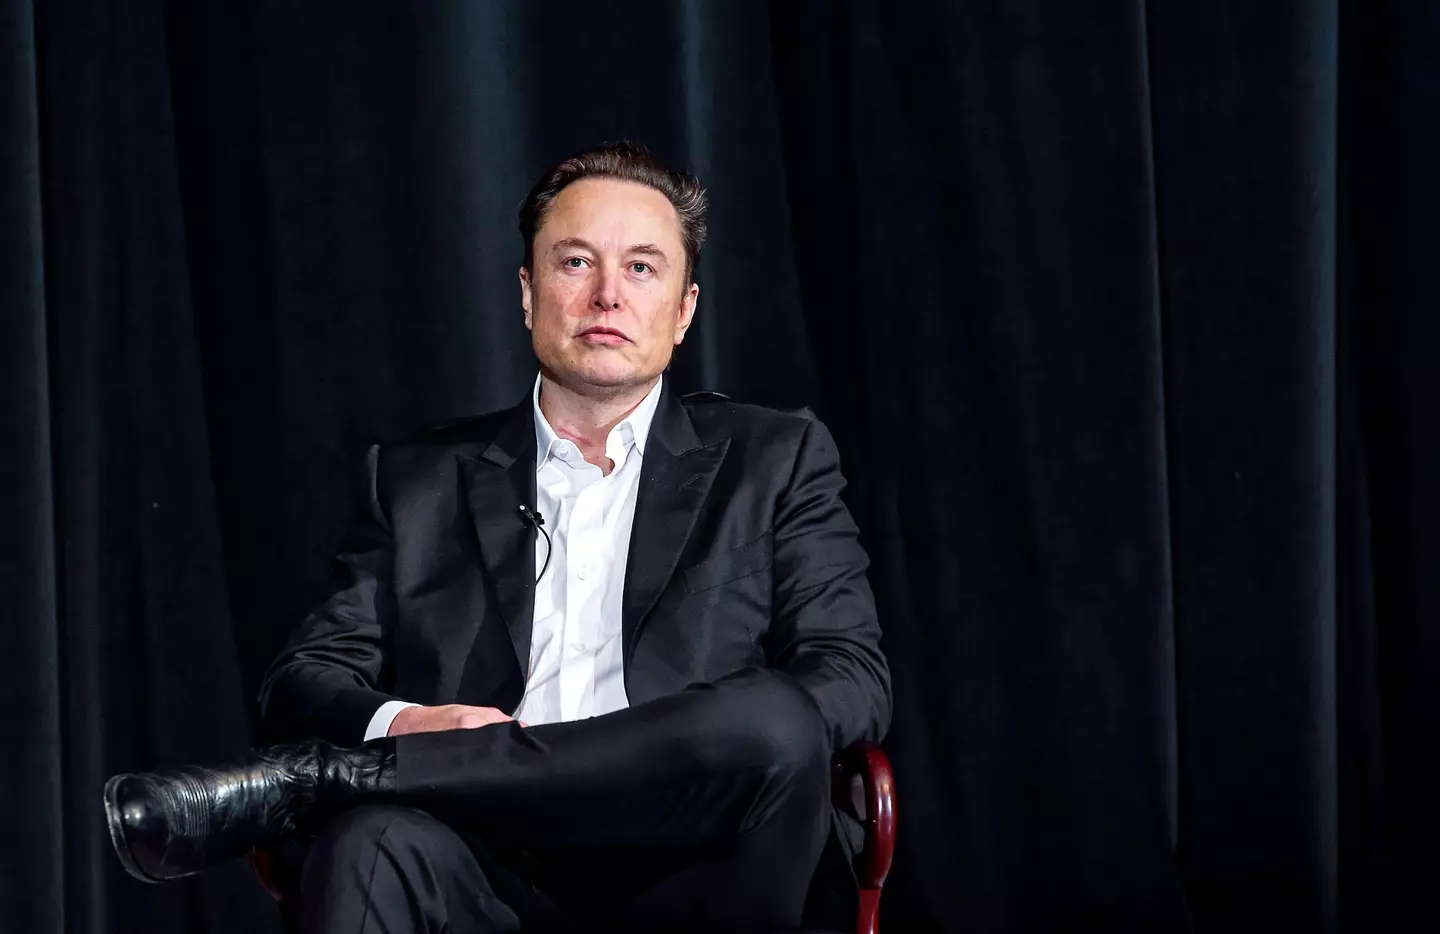 Musk has reportedly lost $100bn in the past year.